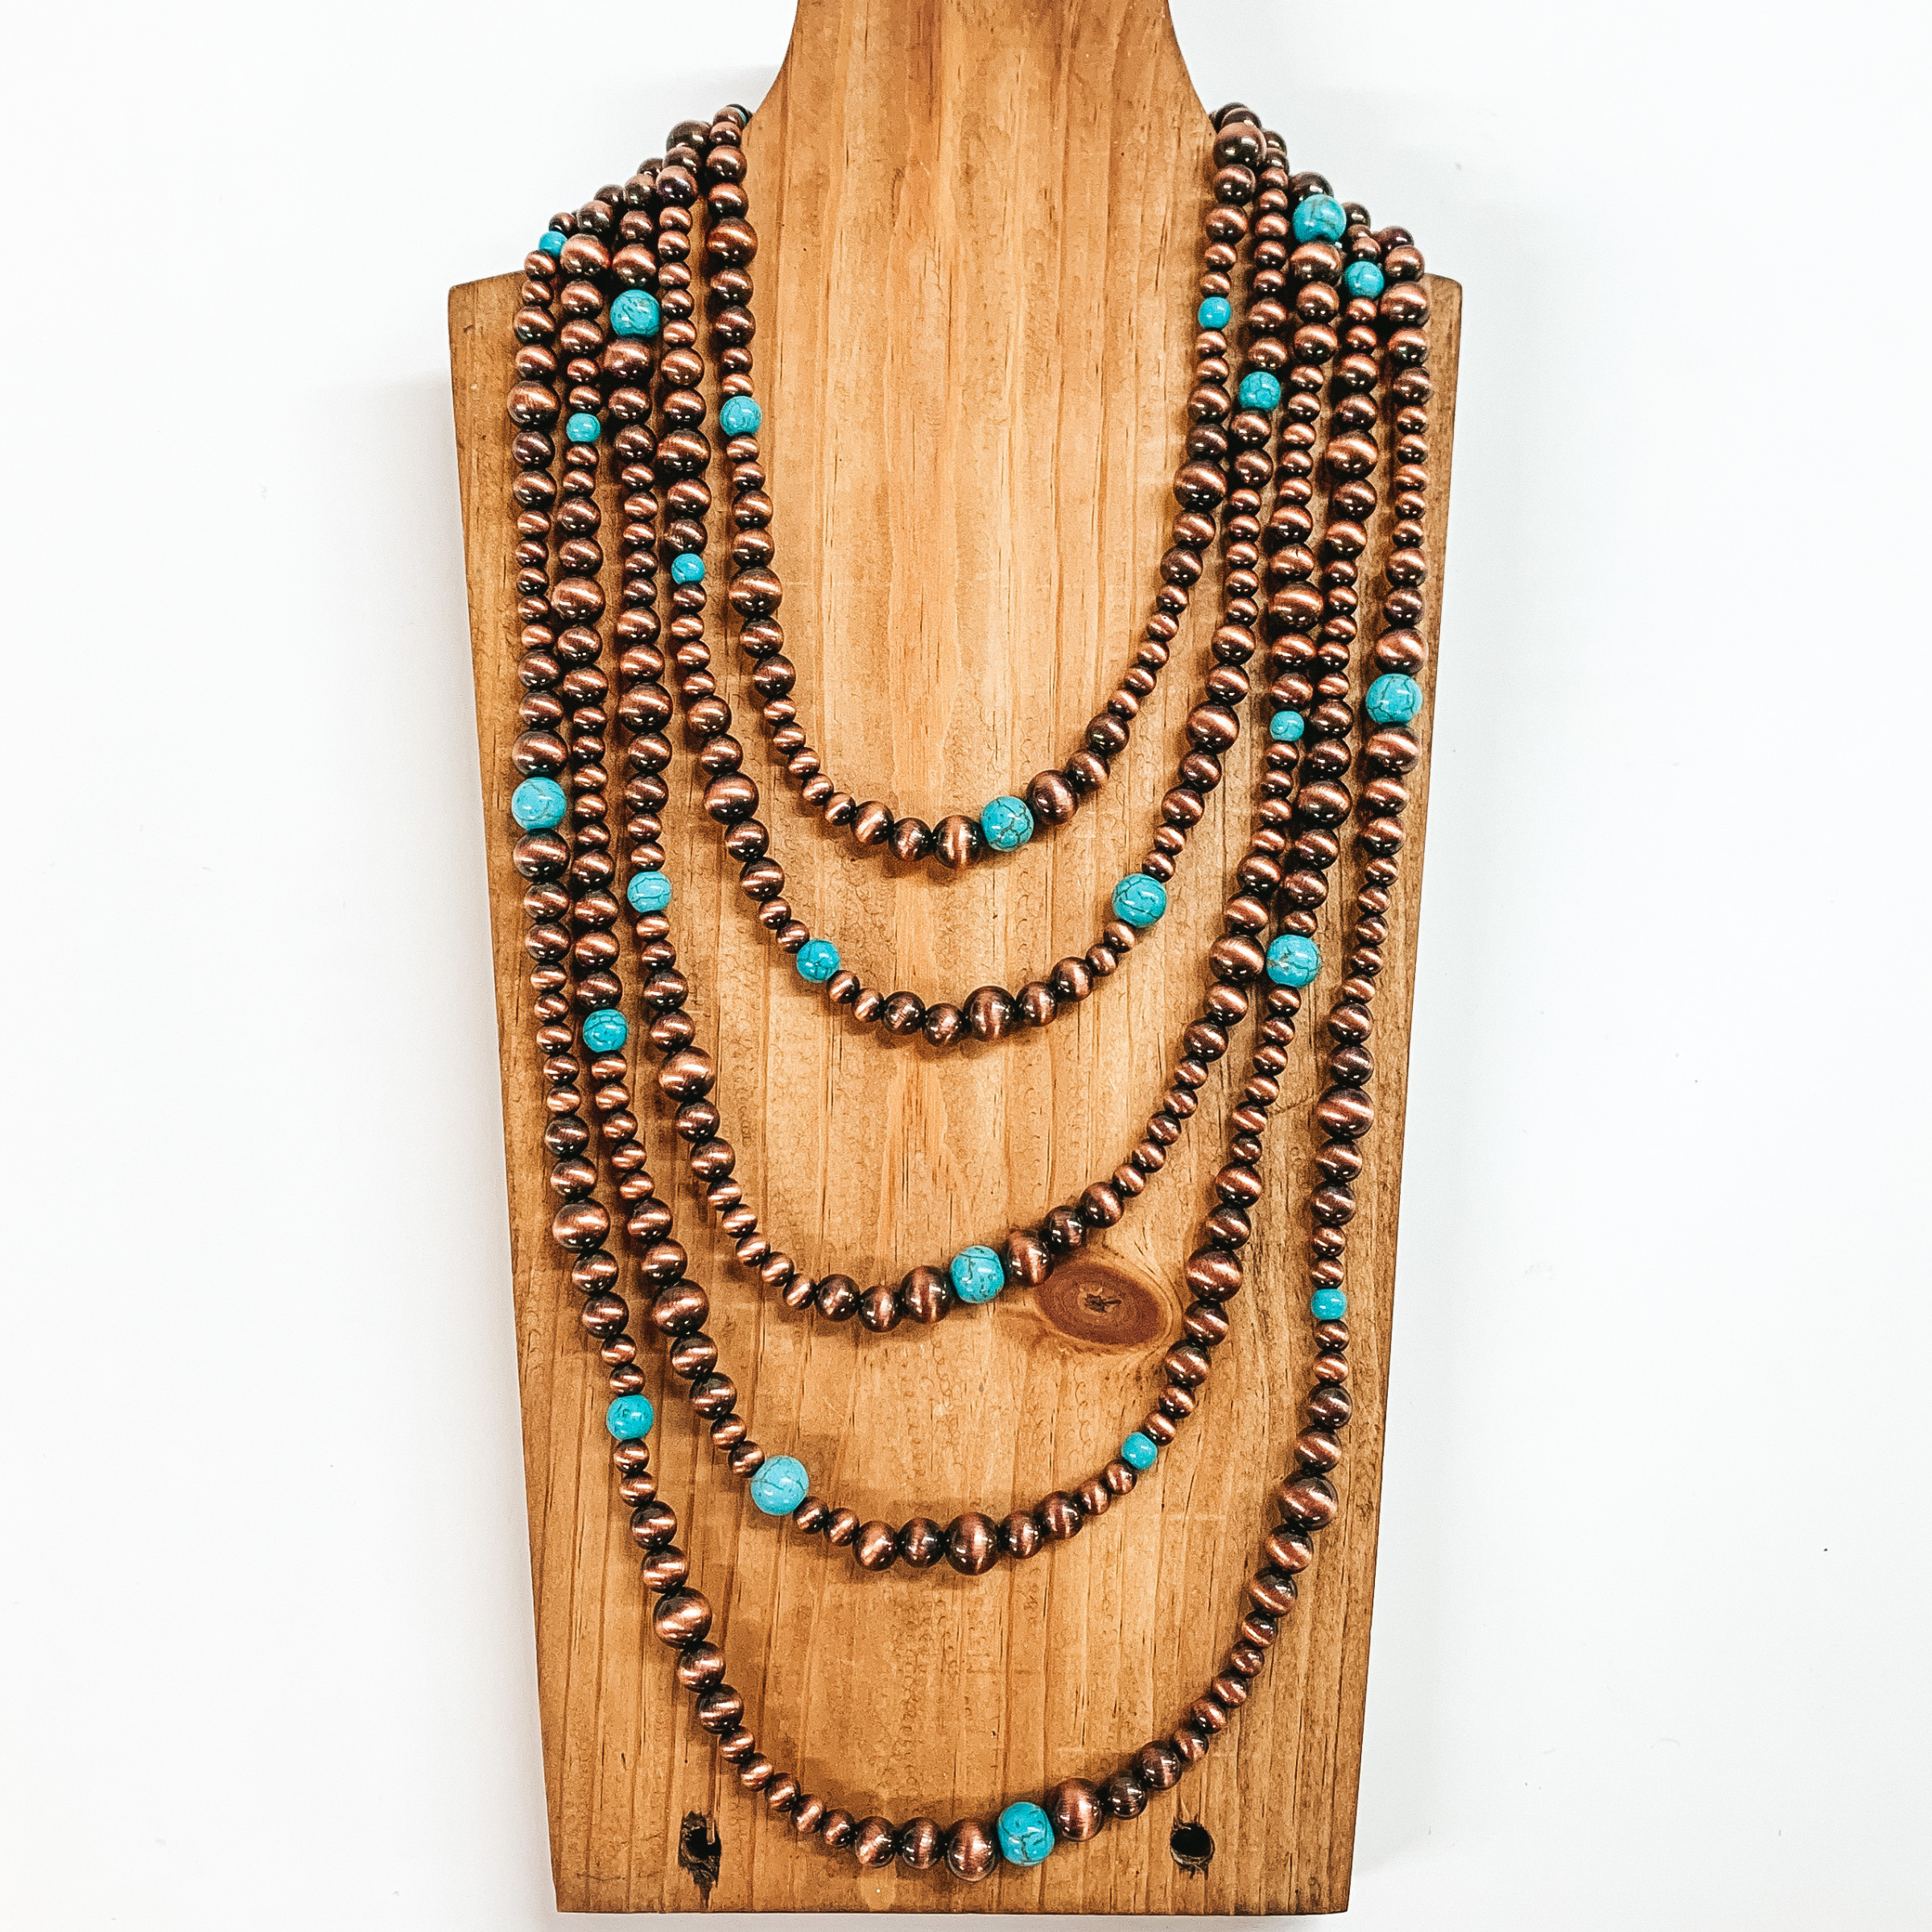 Five Strand Beaded Necklace with Turquoise Spacers in Copper Tone - Giddy Up Glamour Boutique